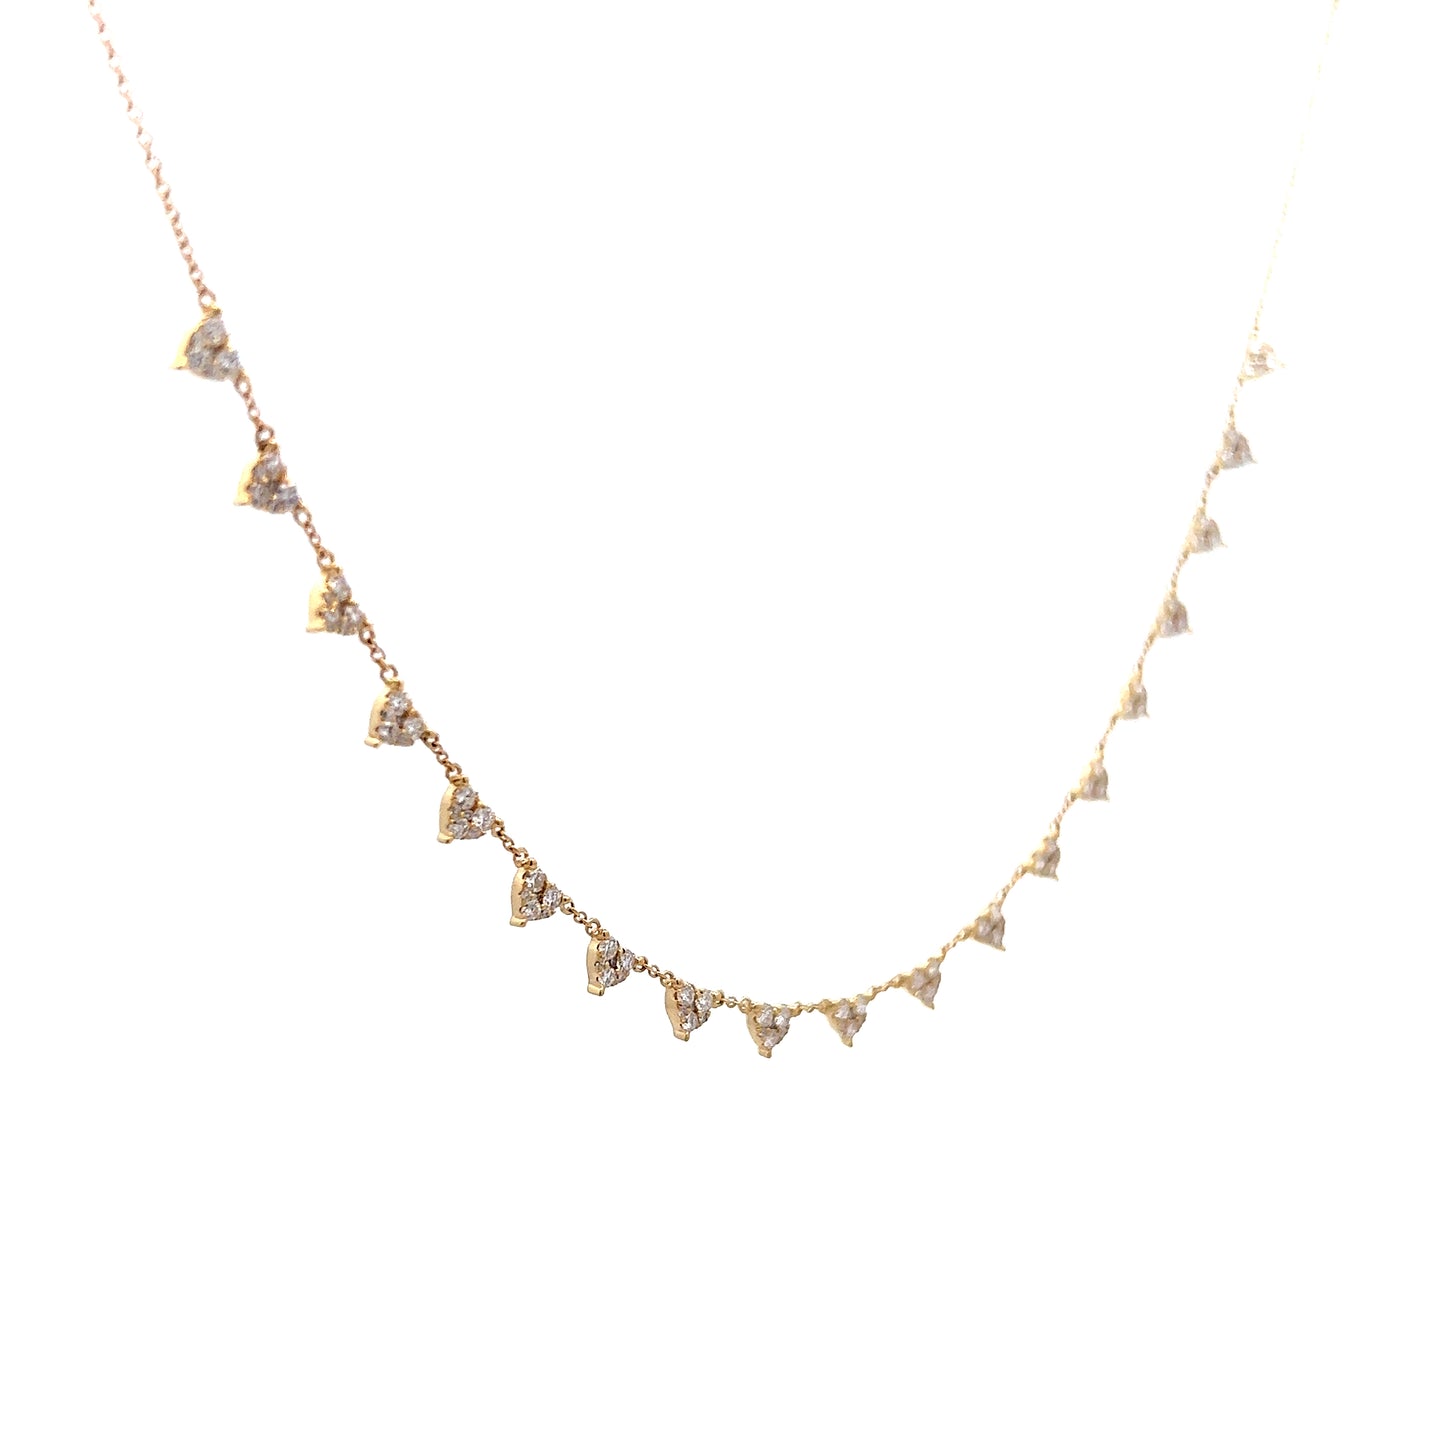 1.01 Pave Diamond Necklace in 14k Yellow Gold